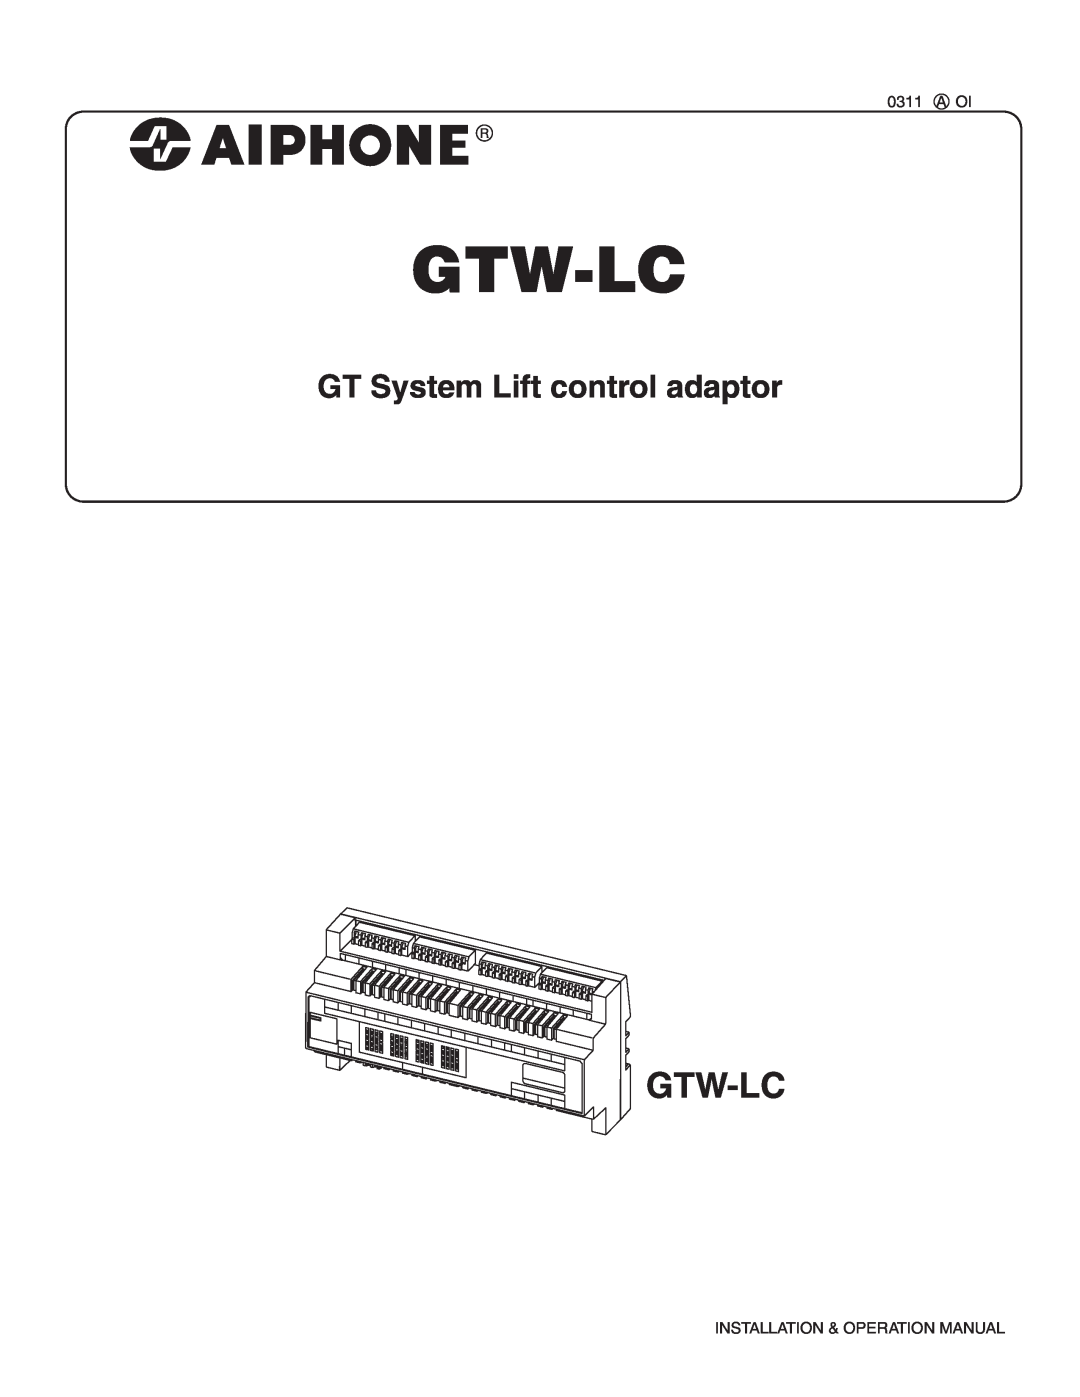 Aiphone GTW-LC service manual GT System Lift control adaptor, A Oi, Installation & Operation Manual, Gtw-Lc 